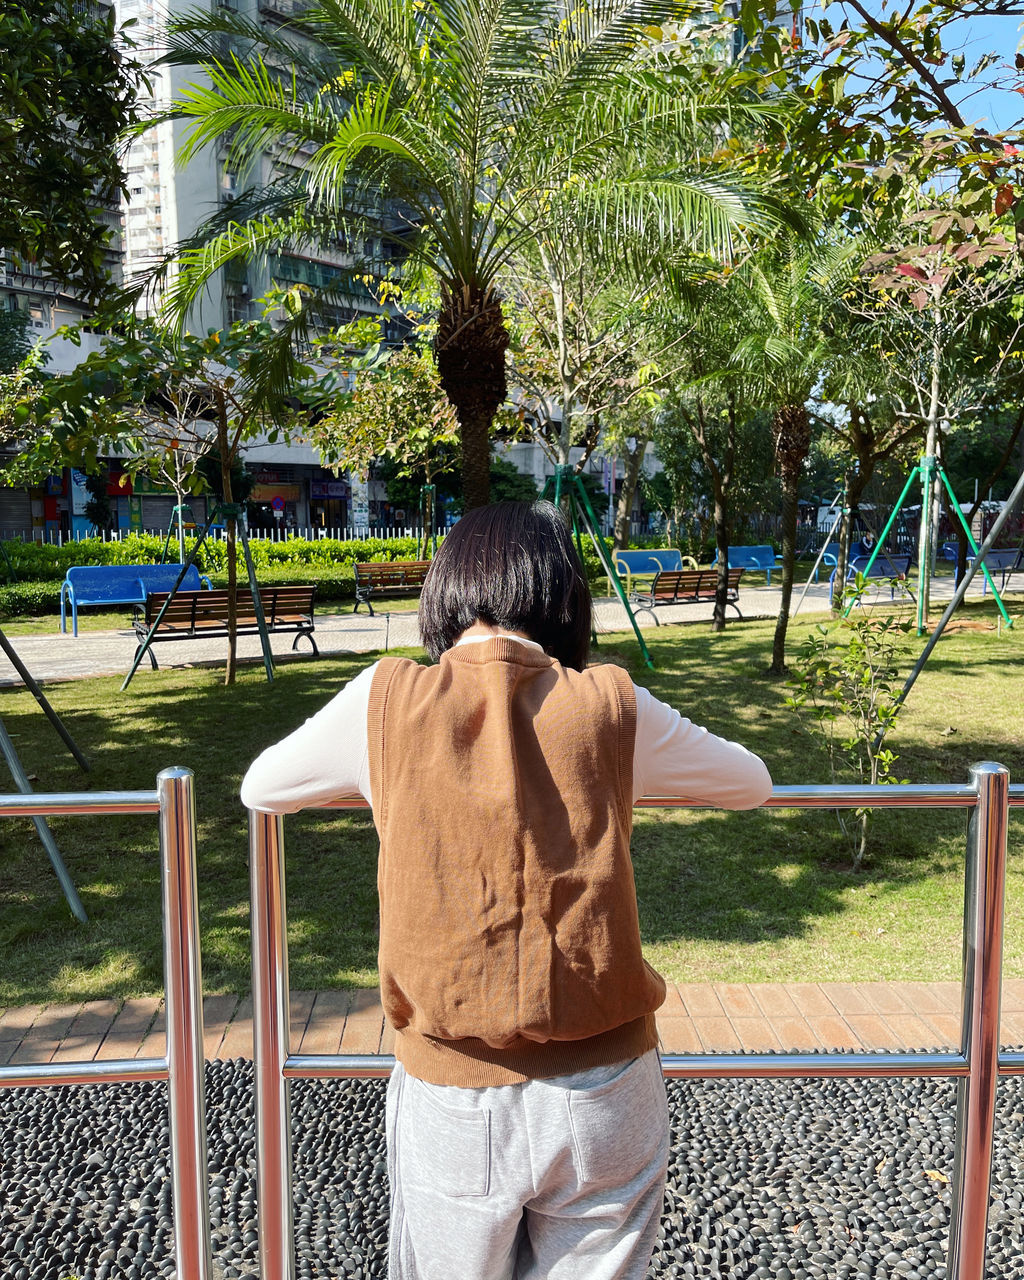 rear view, one person, plant, tree, nature, leisure activity, city, casual clothing, lifestyles, day, park, vacation, women, adult, park - man made space, three quarter length, spring, clothing, public space, outdoors, men, standing, outdoor play equipment, playground, architecture, railing, green, full length